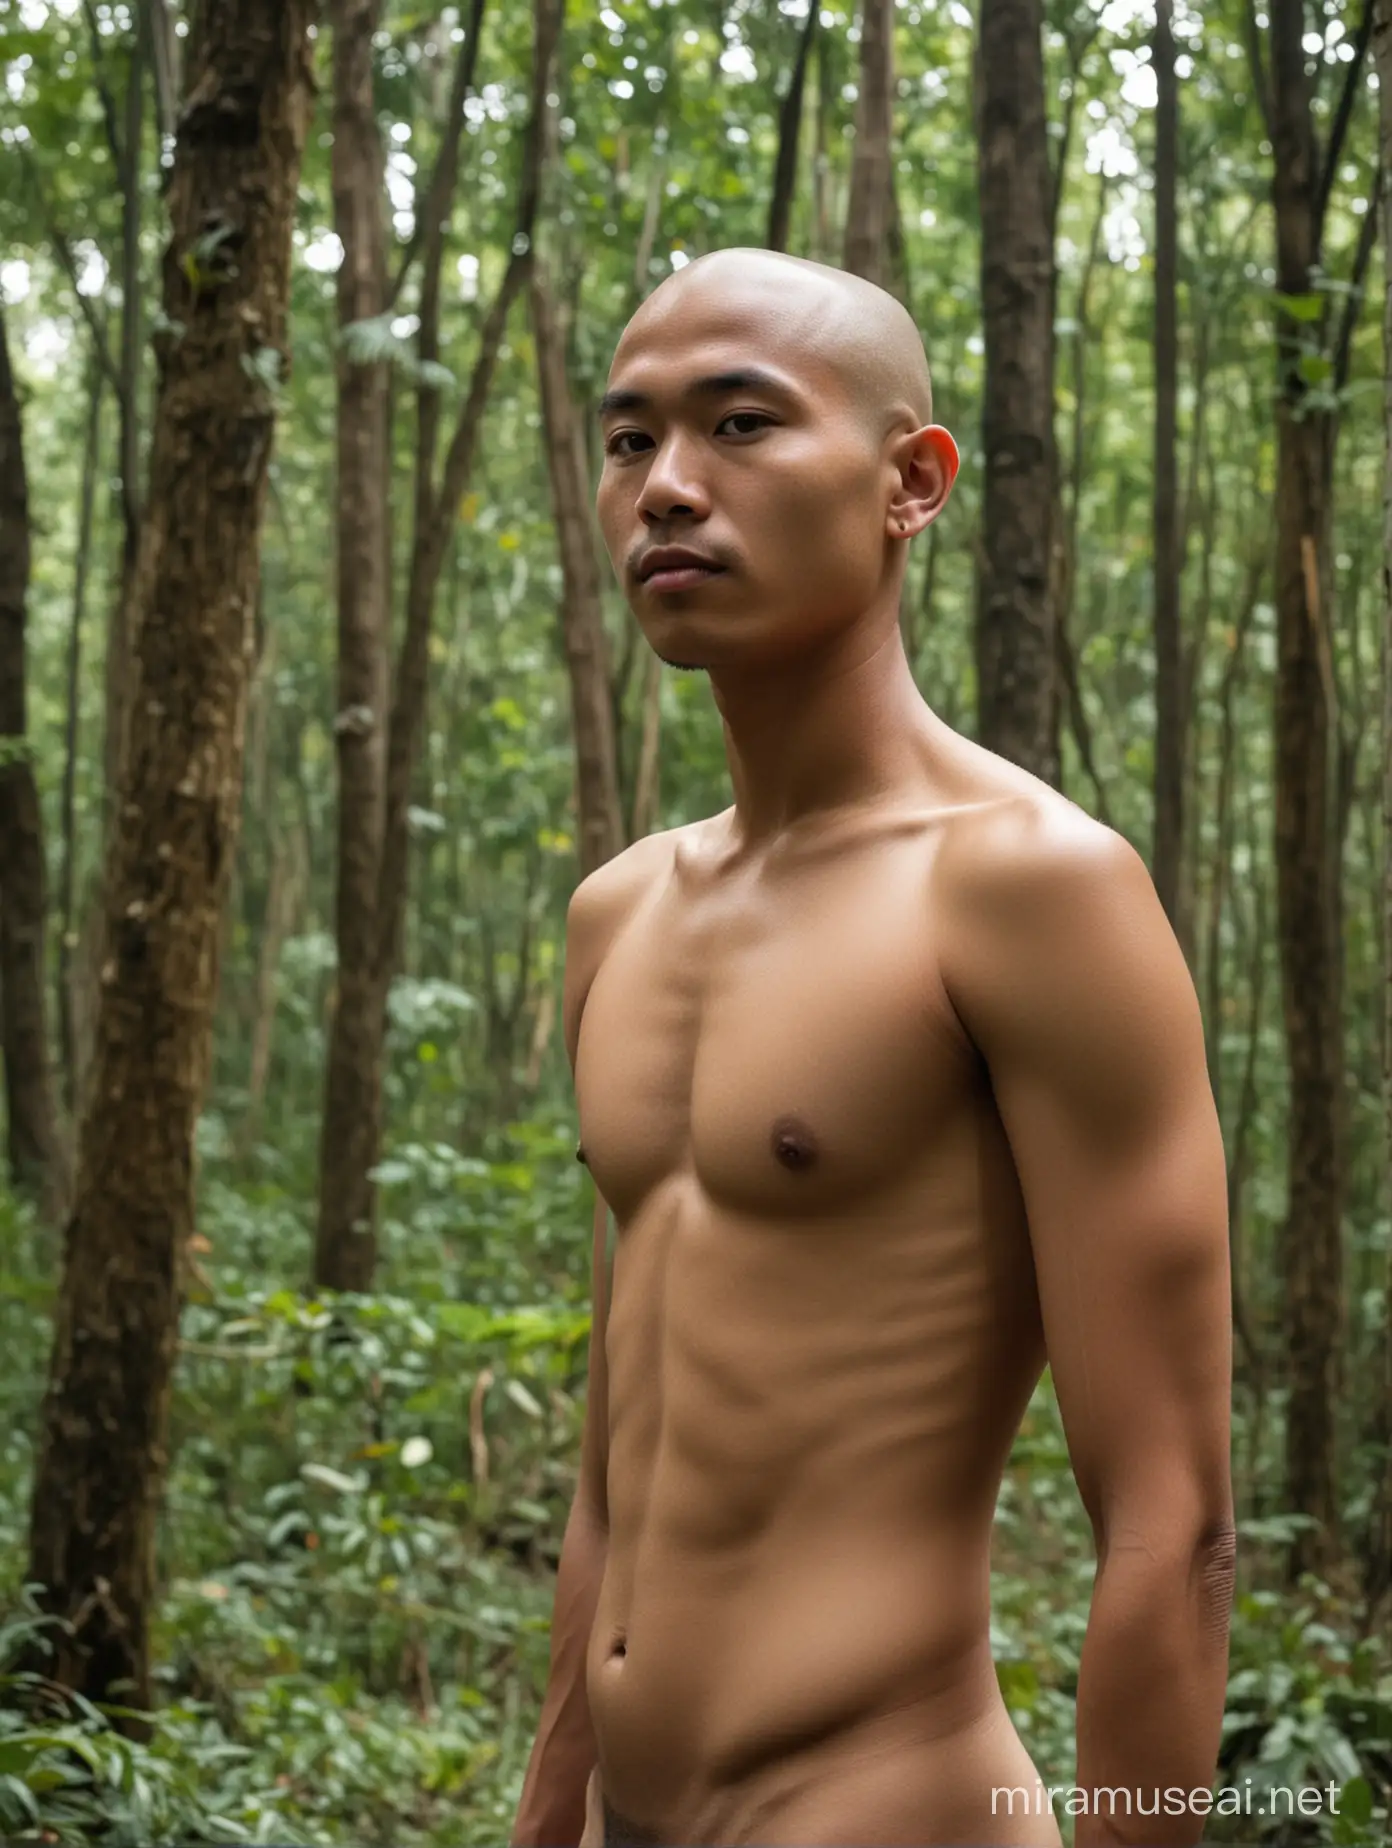 Naked Indonesian Man with Bald Head Amidst Lush Forest Canopy